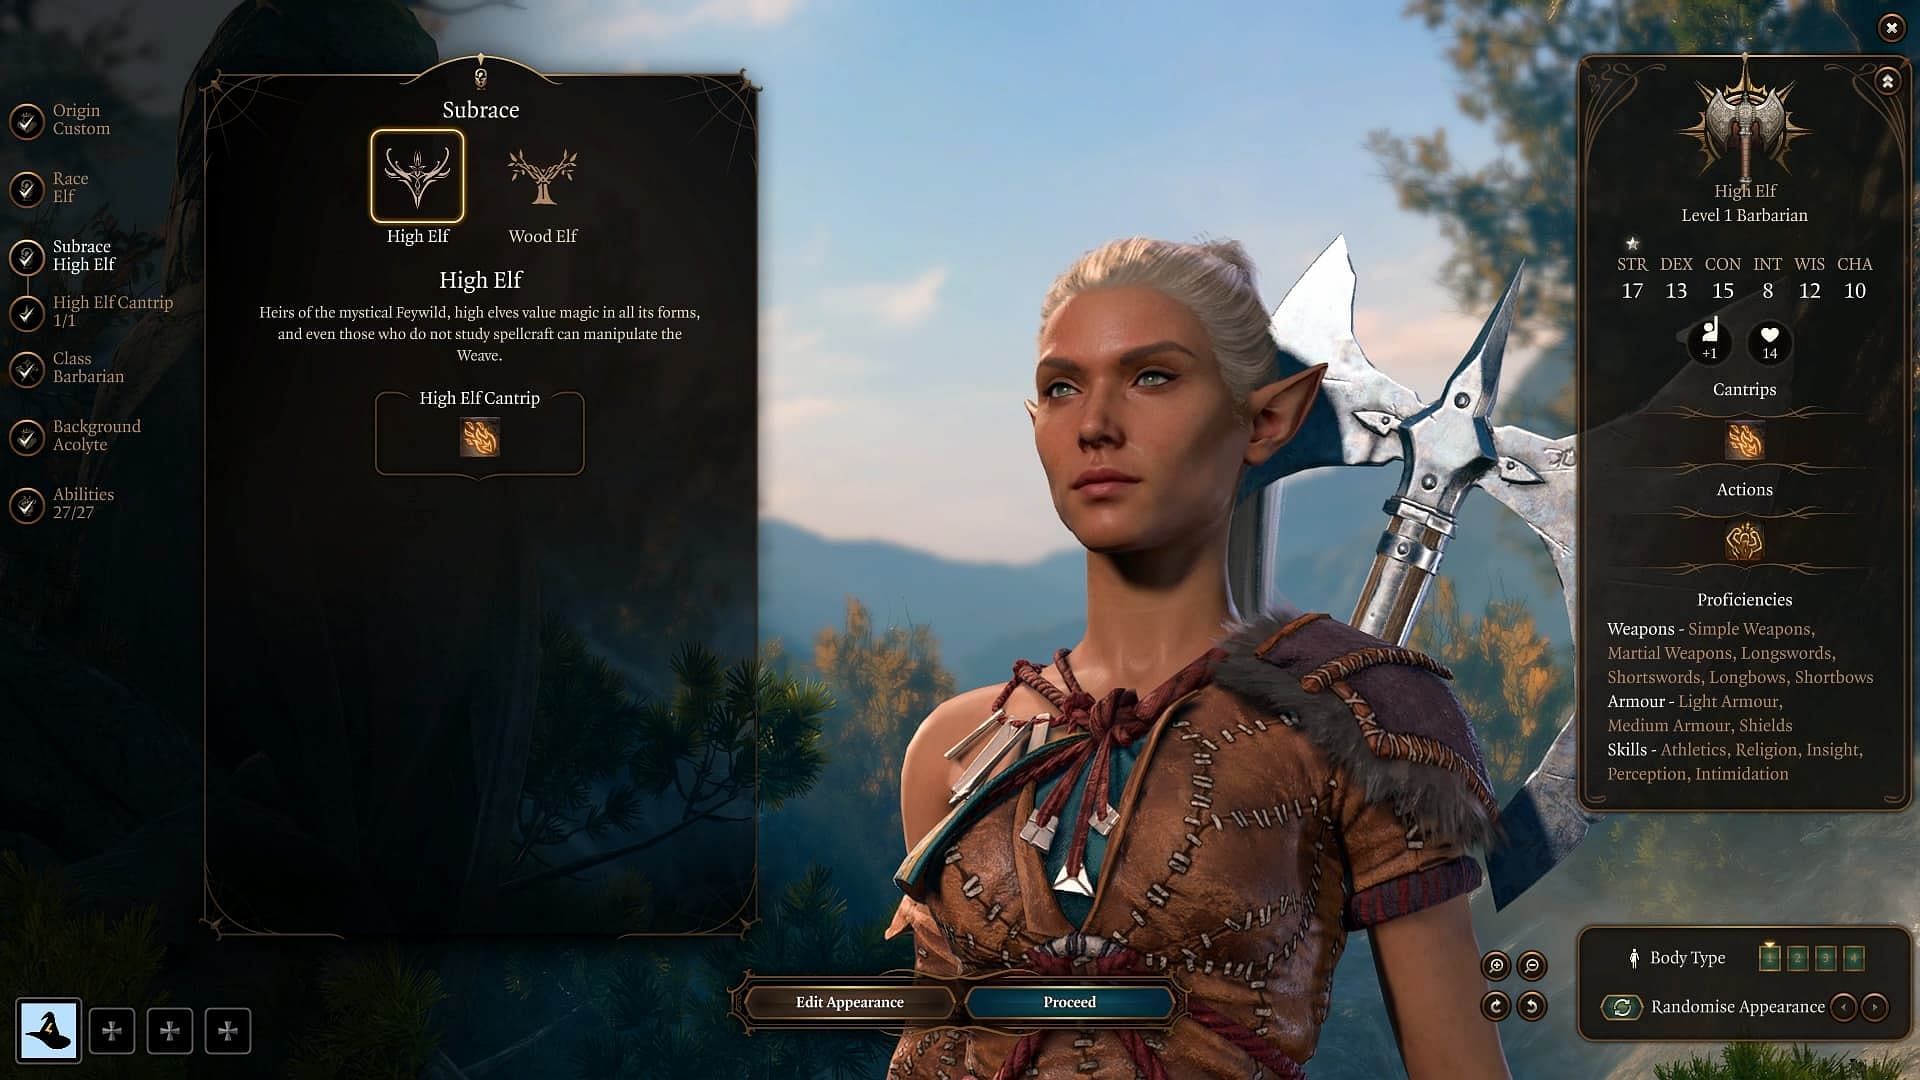 High Elf is a great race choice for Wizards (Image via Larian Studios)